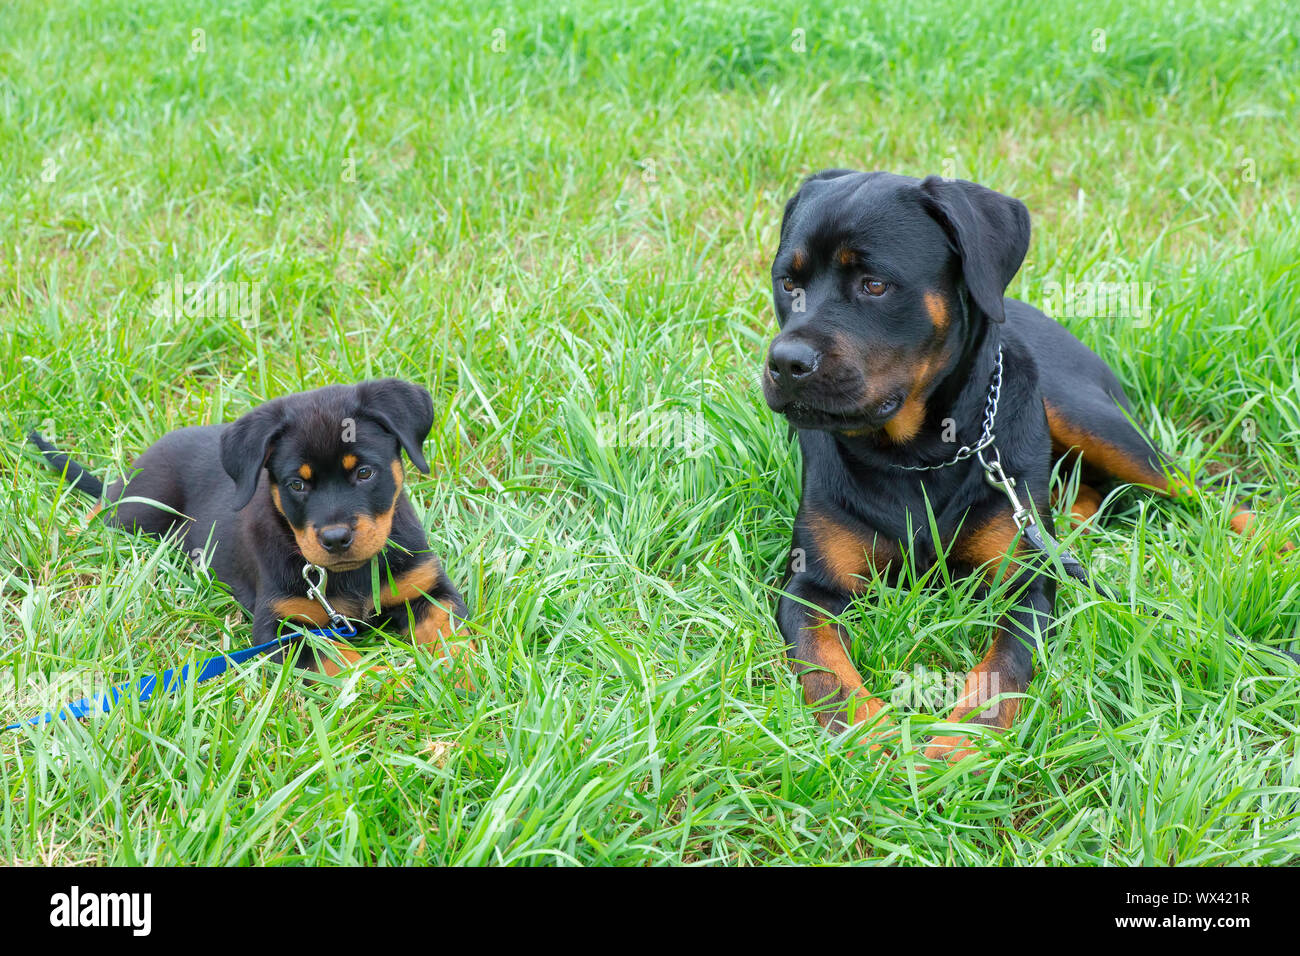 Adultes et chiots rottweiler lying together in grass Banque D'Images